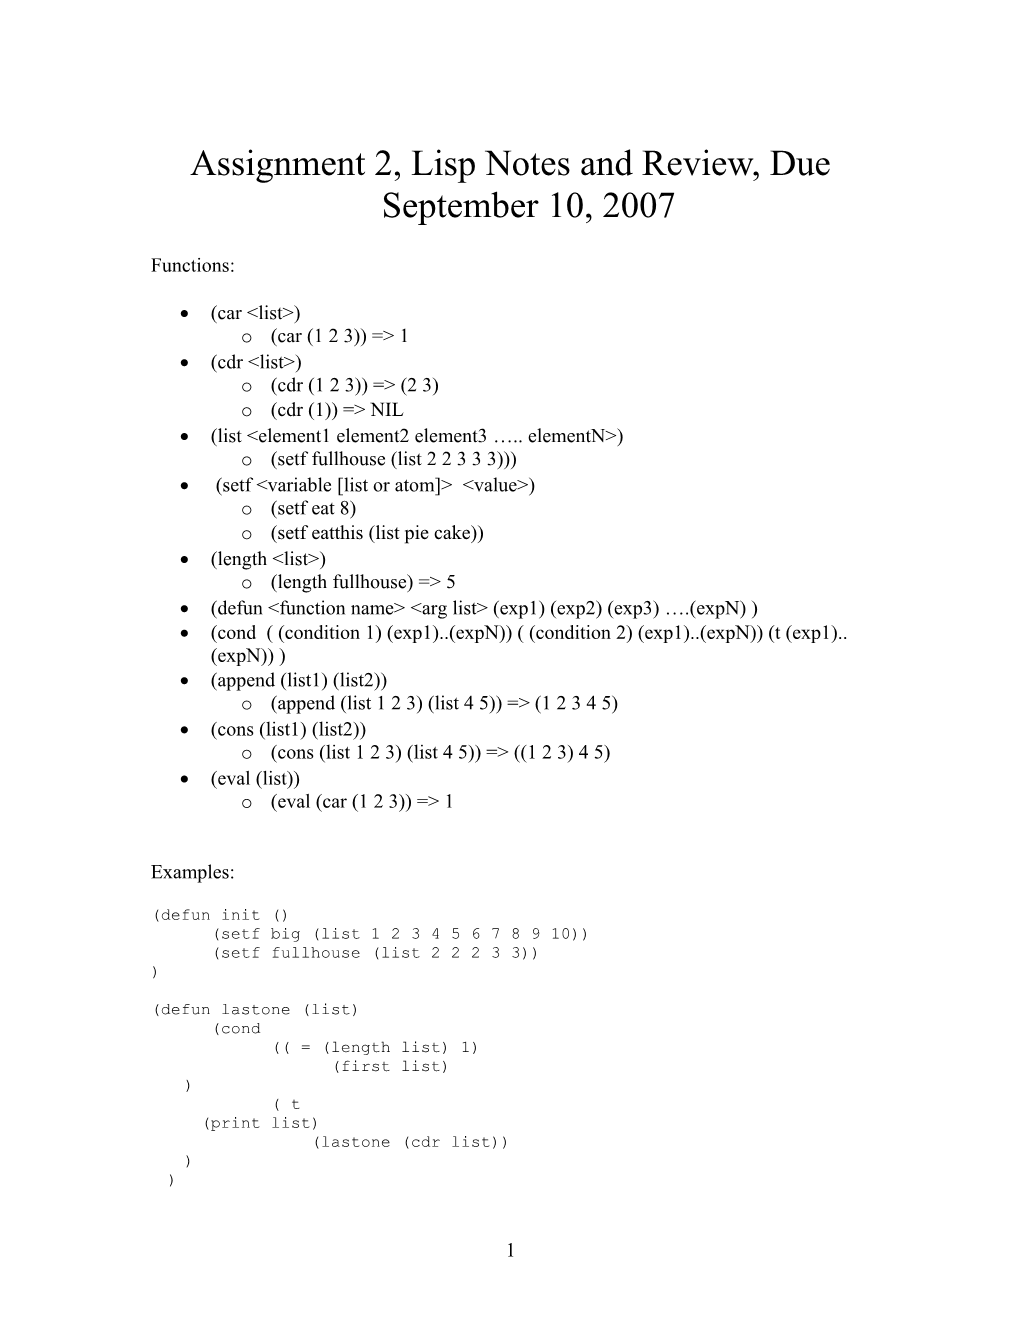 Assignment 2, Lisp Notes and Review, Due September 10, 2007